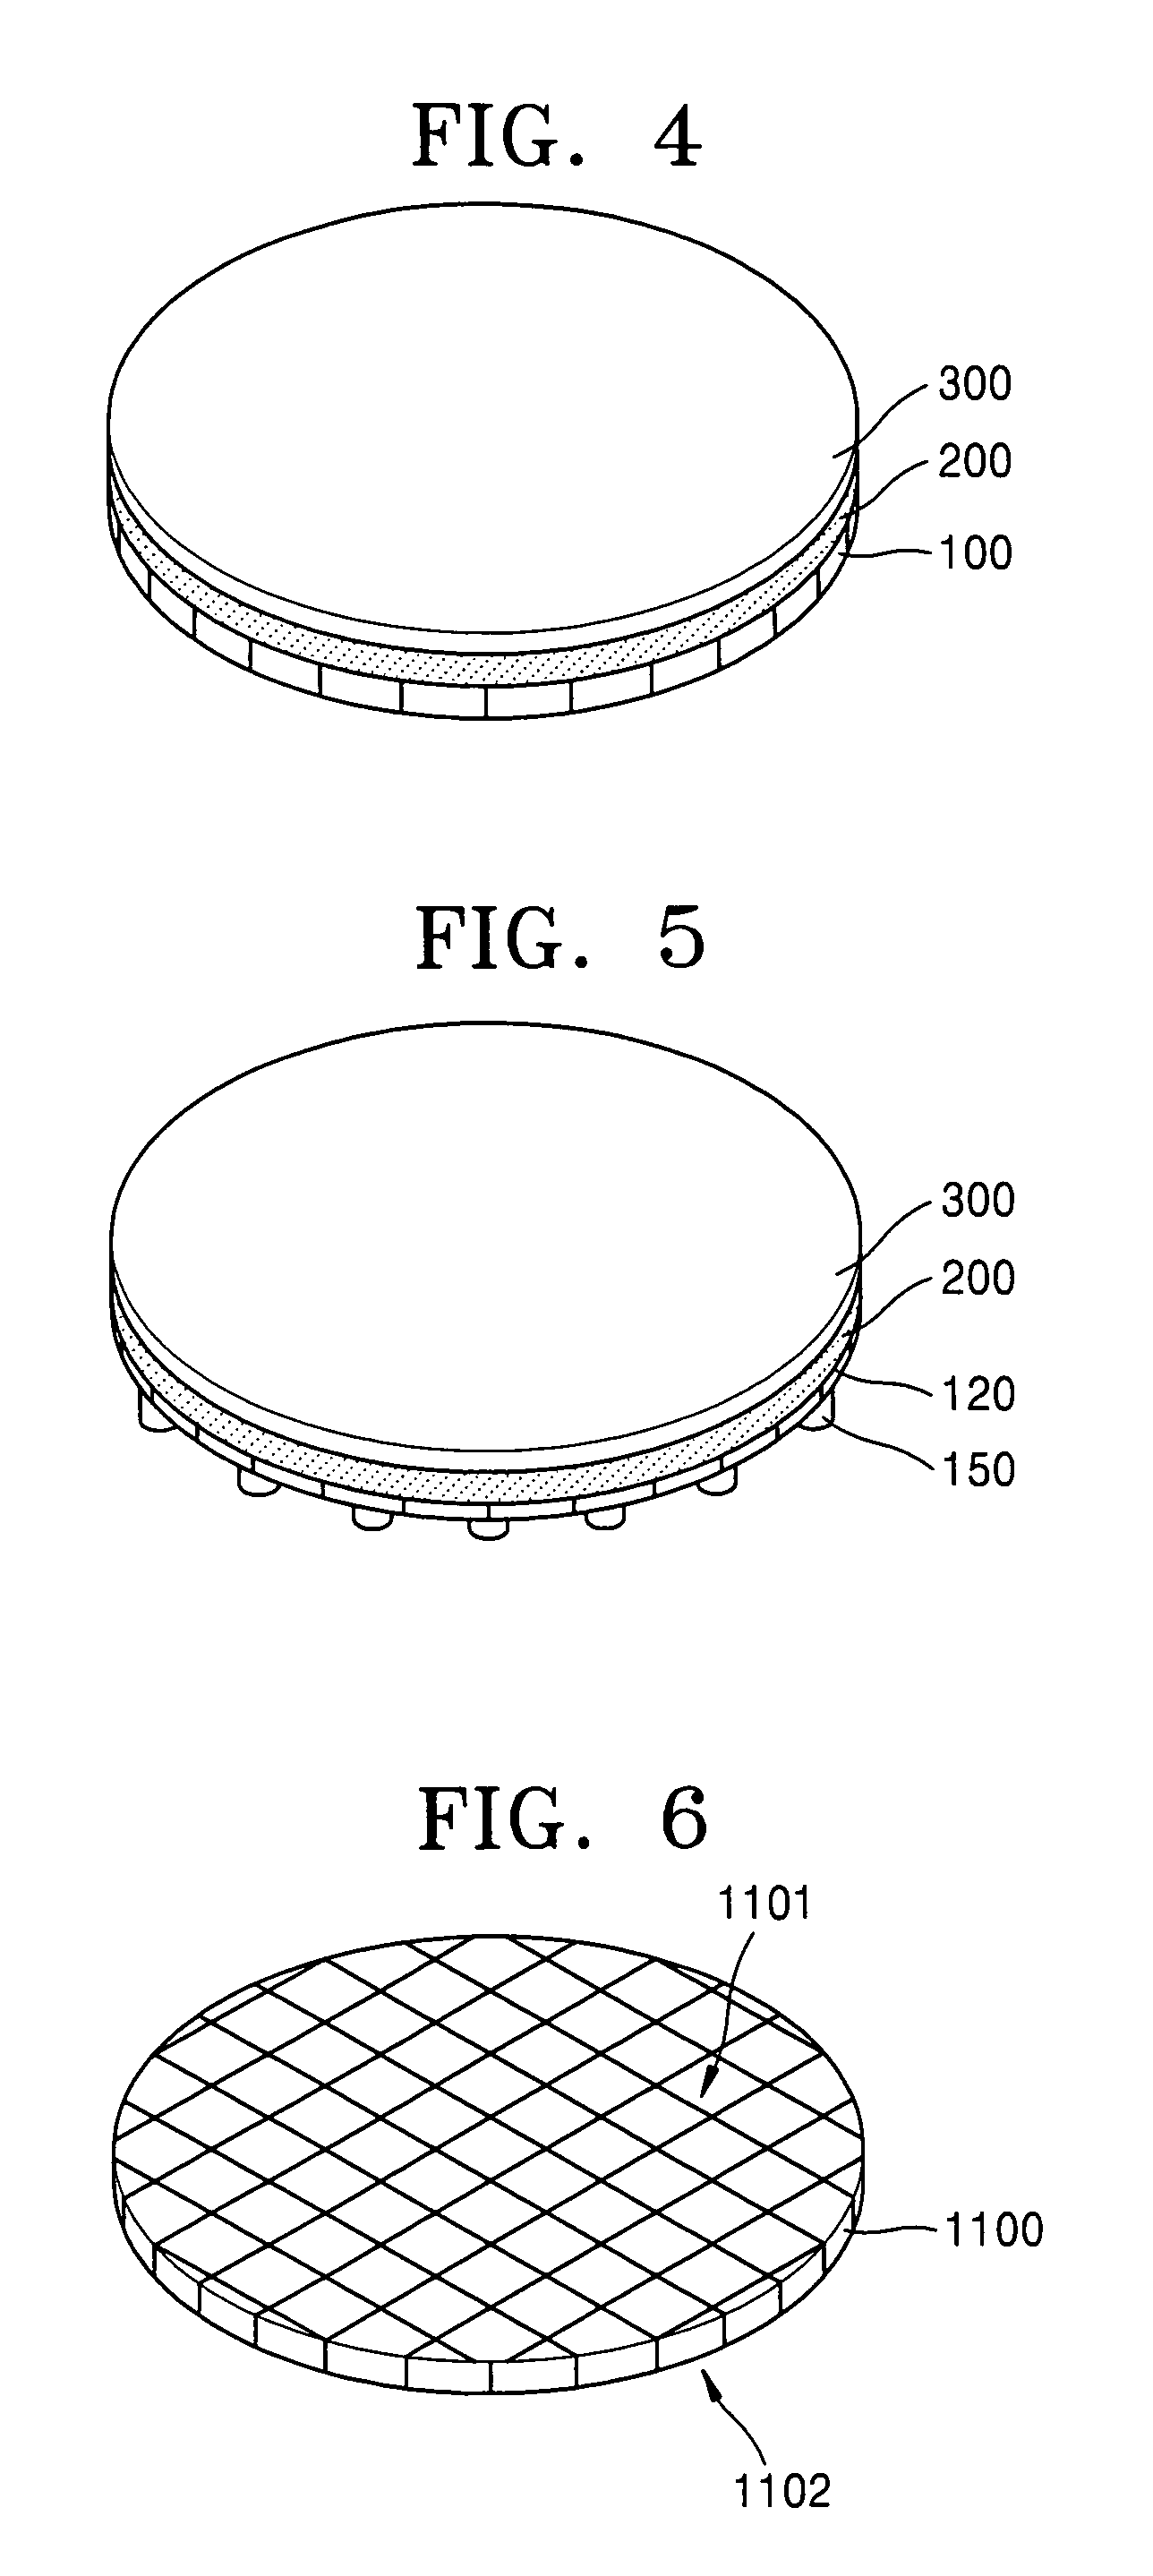 Method of forming a thin wafer stack for a wafer level package